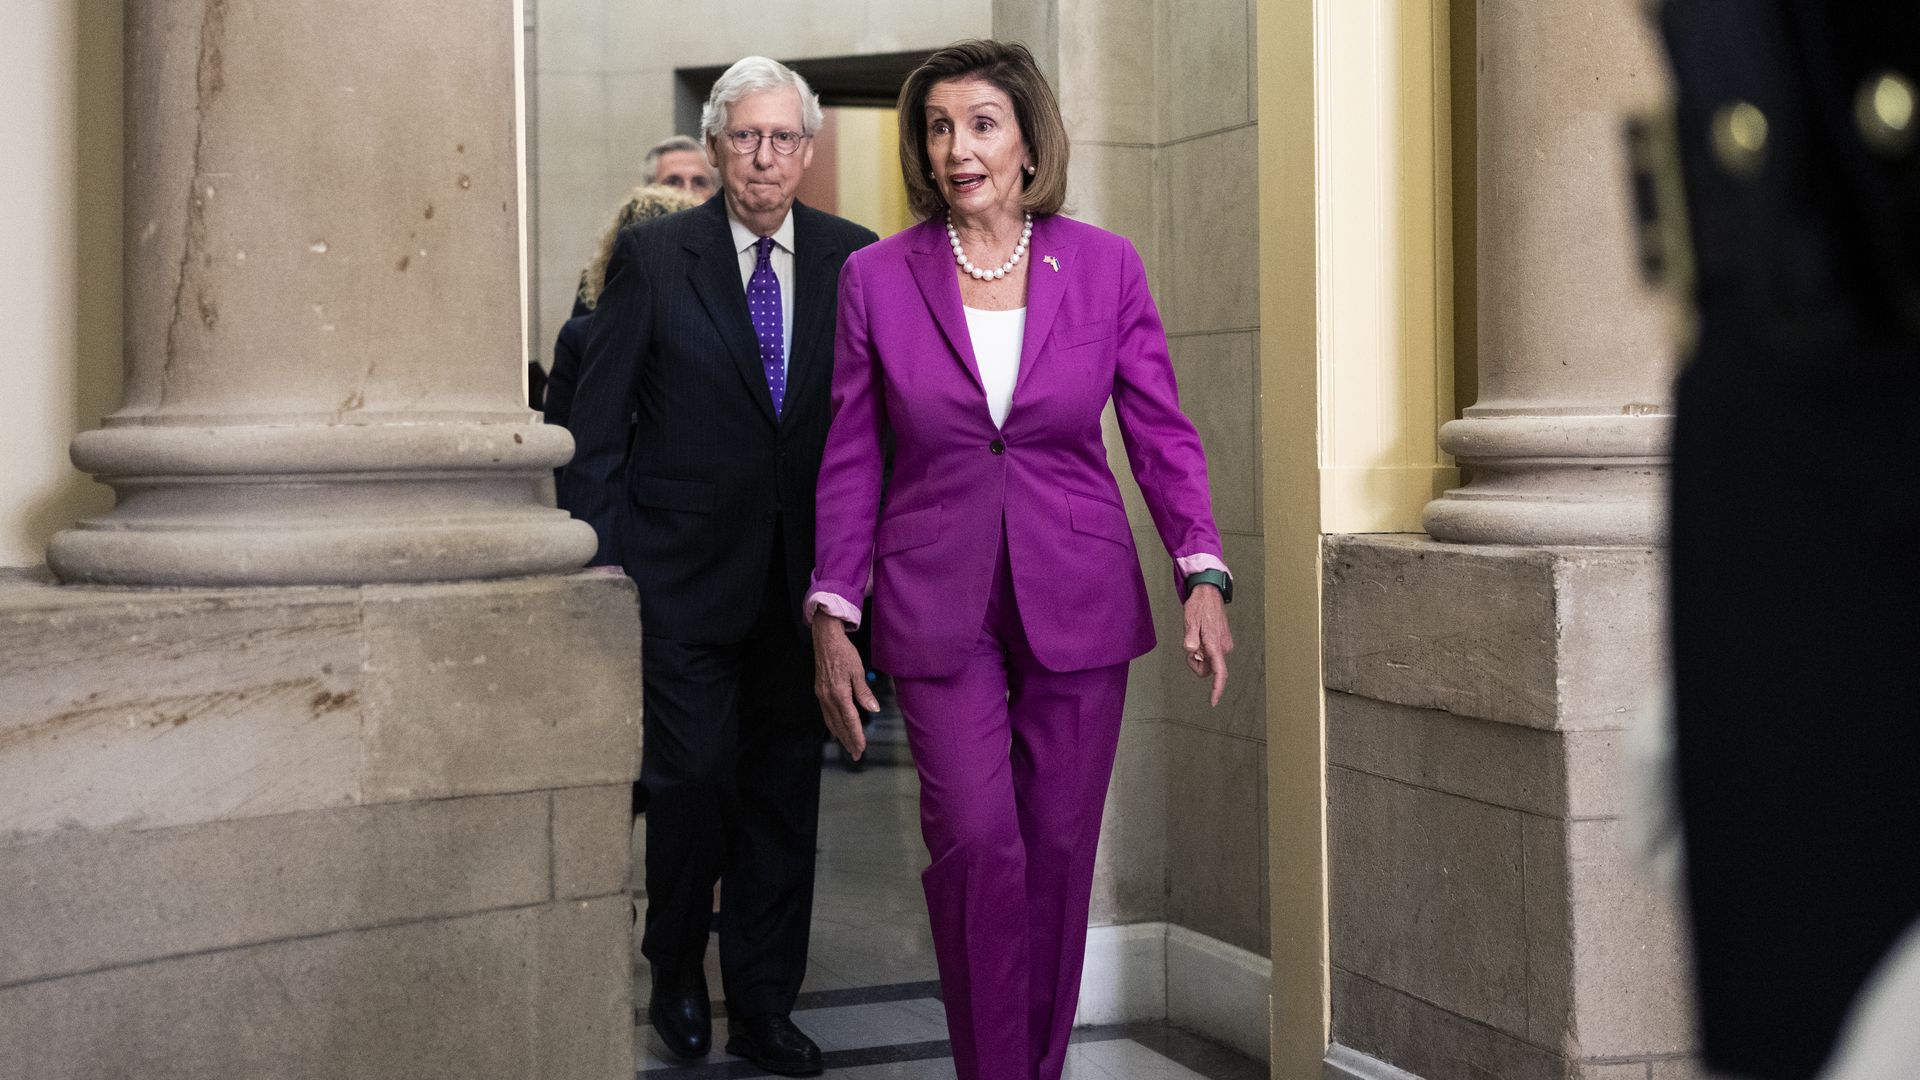 Speaker of the House Nancy Pelosi (D-Calif.) and Senate Minority Leader Mitch McConnell (R-Ky.) in the U.S. Capitol in July 2022.